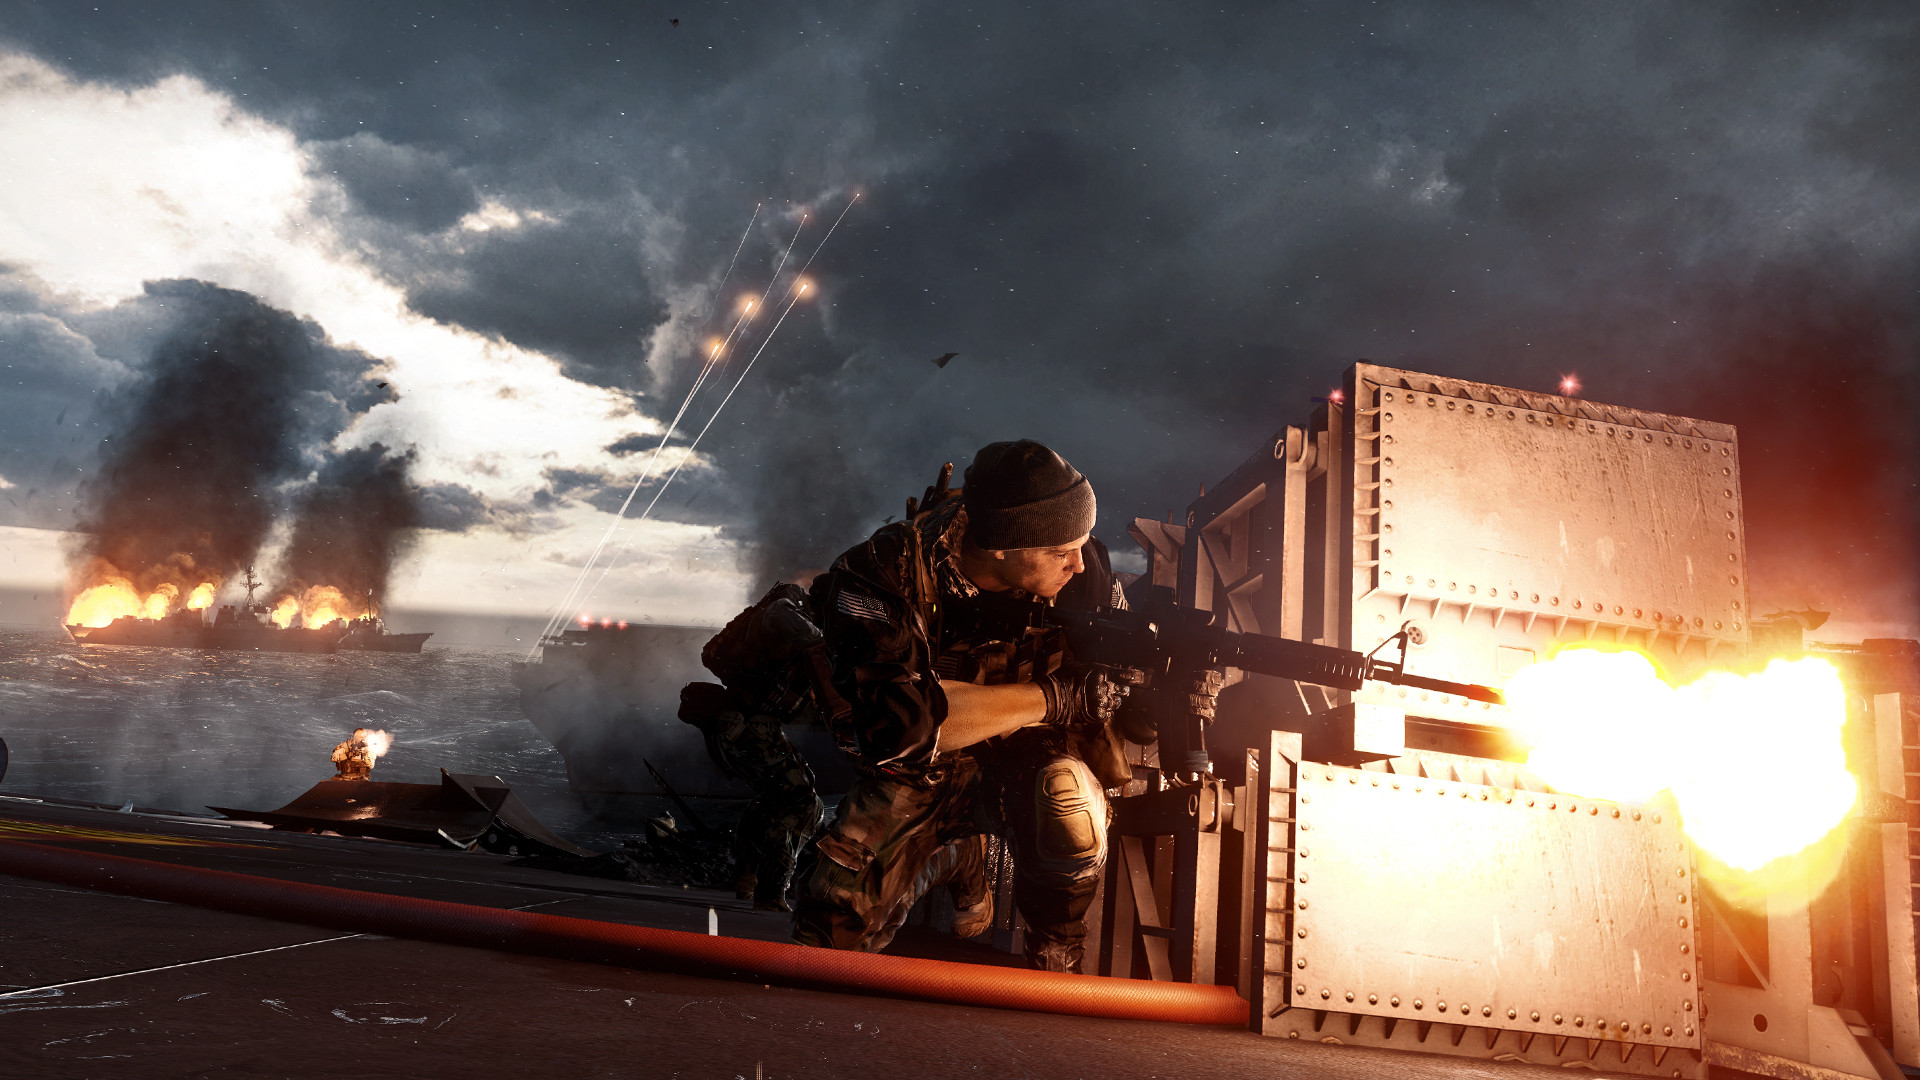 Battlefield 4 is an FPS Done Right | Source: DICE